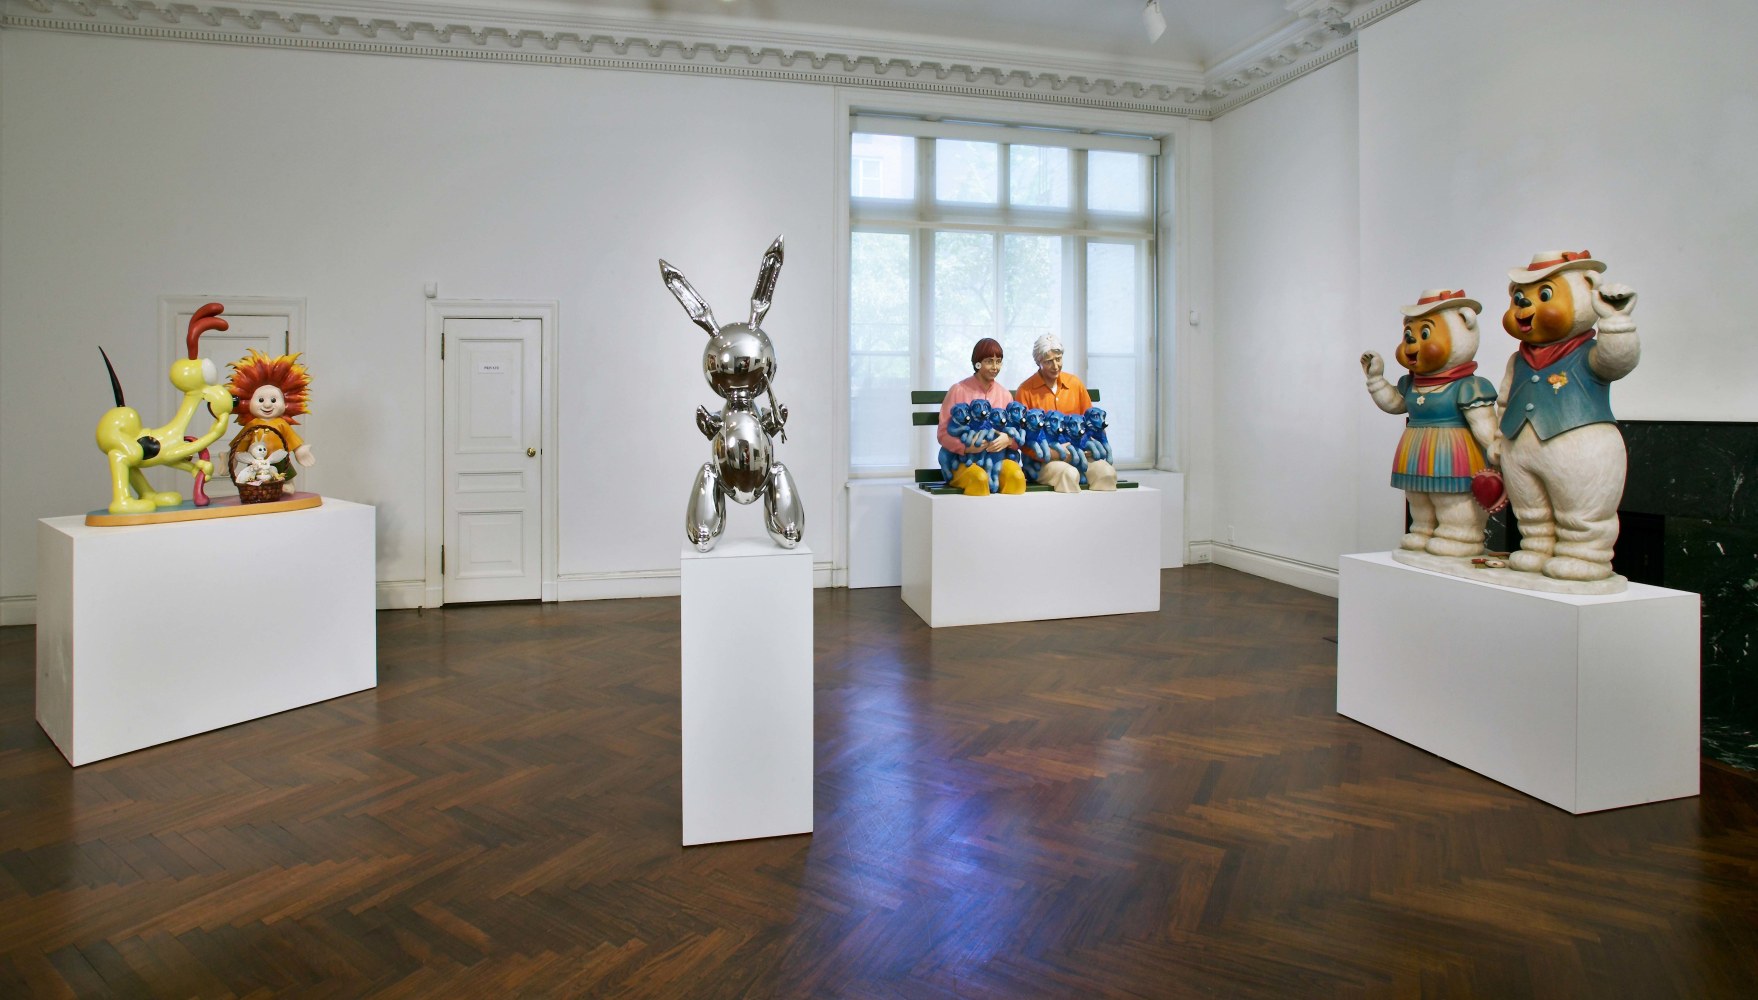 Installation view of&amp;nbsp;Jeff Koons: Highlights of 25 Years&amp;nbsp;at Mnuchin Gallery, April 7 - June 5, 2004. Photography by Tom Powel Imaging.